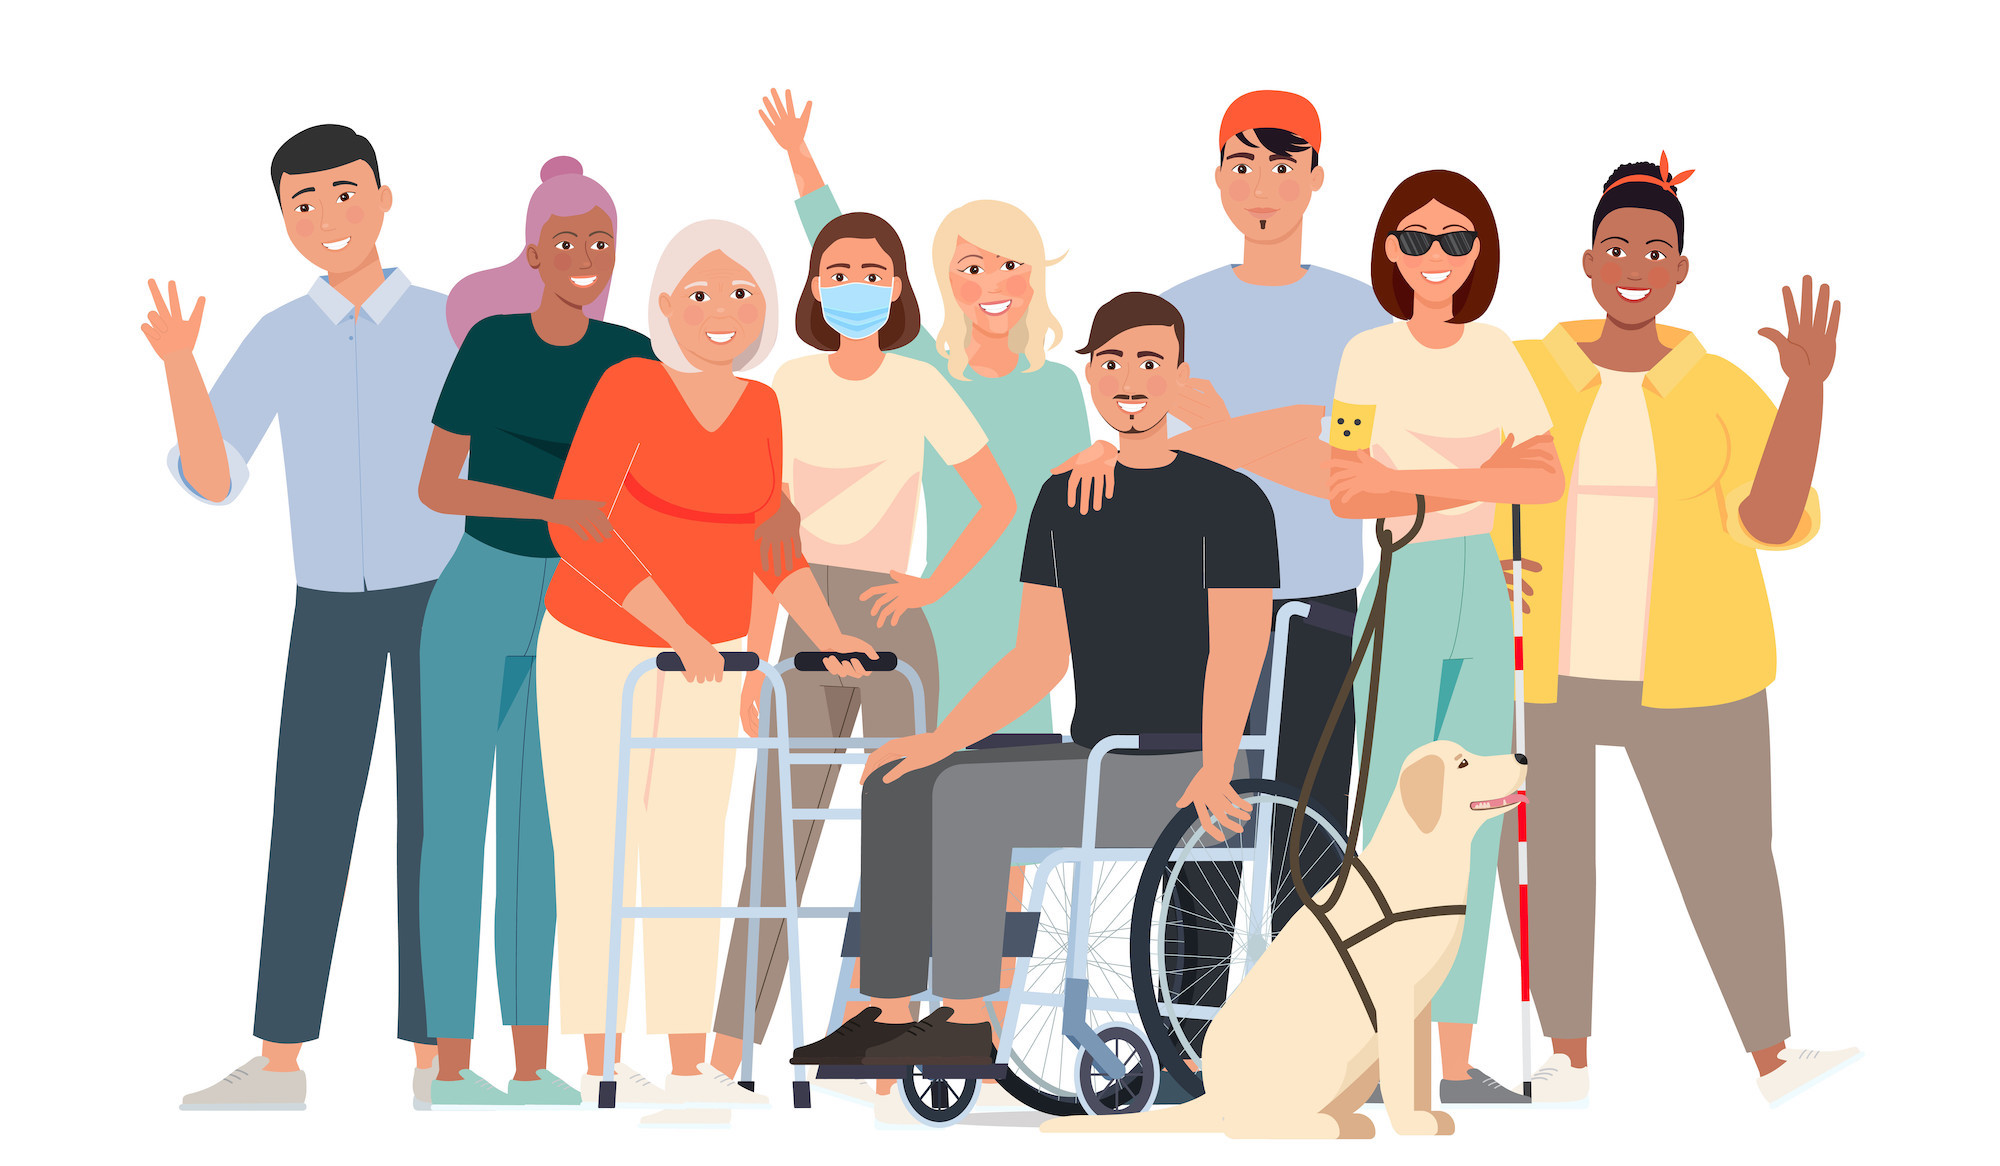 Vector illustration of adults with diverse disability types, skin colors, hair textures, and body types. Includes two individuals with higher body weight, a woman using a walker, a woman wearing a mask, a woman with psoriasis, a man in a wheelchair, a man with a head covering, and woman with low vision using a white cane and guide dog.